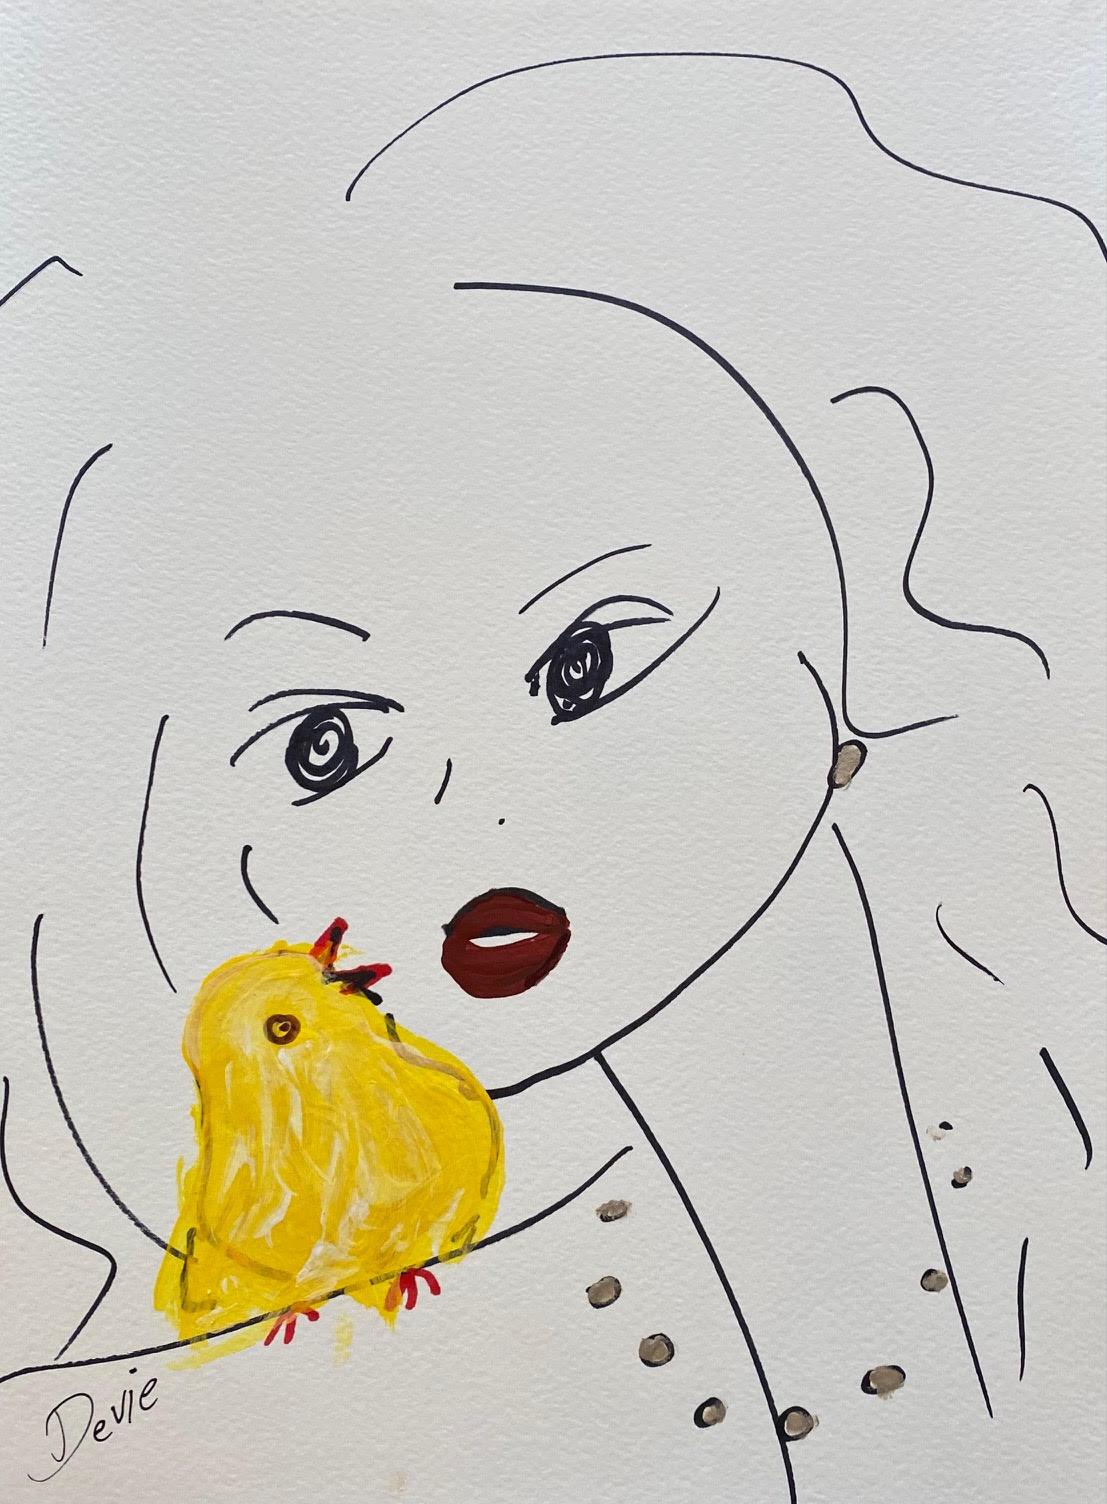 'Talking With Bird' Portrait Original Drawing On Paper by Devie